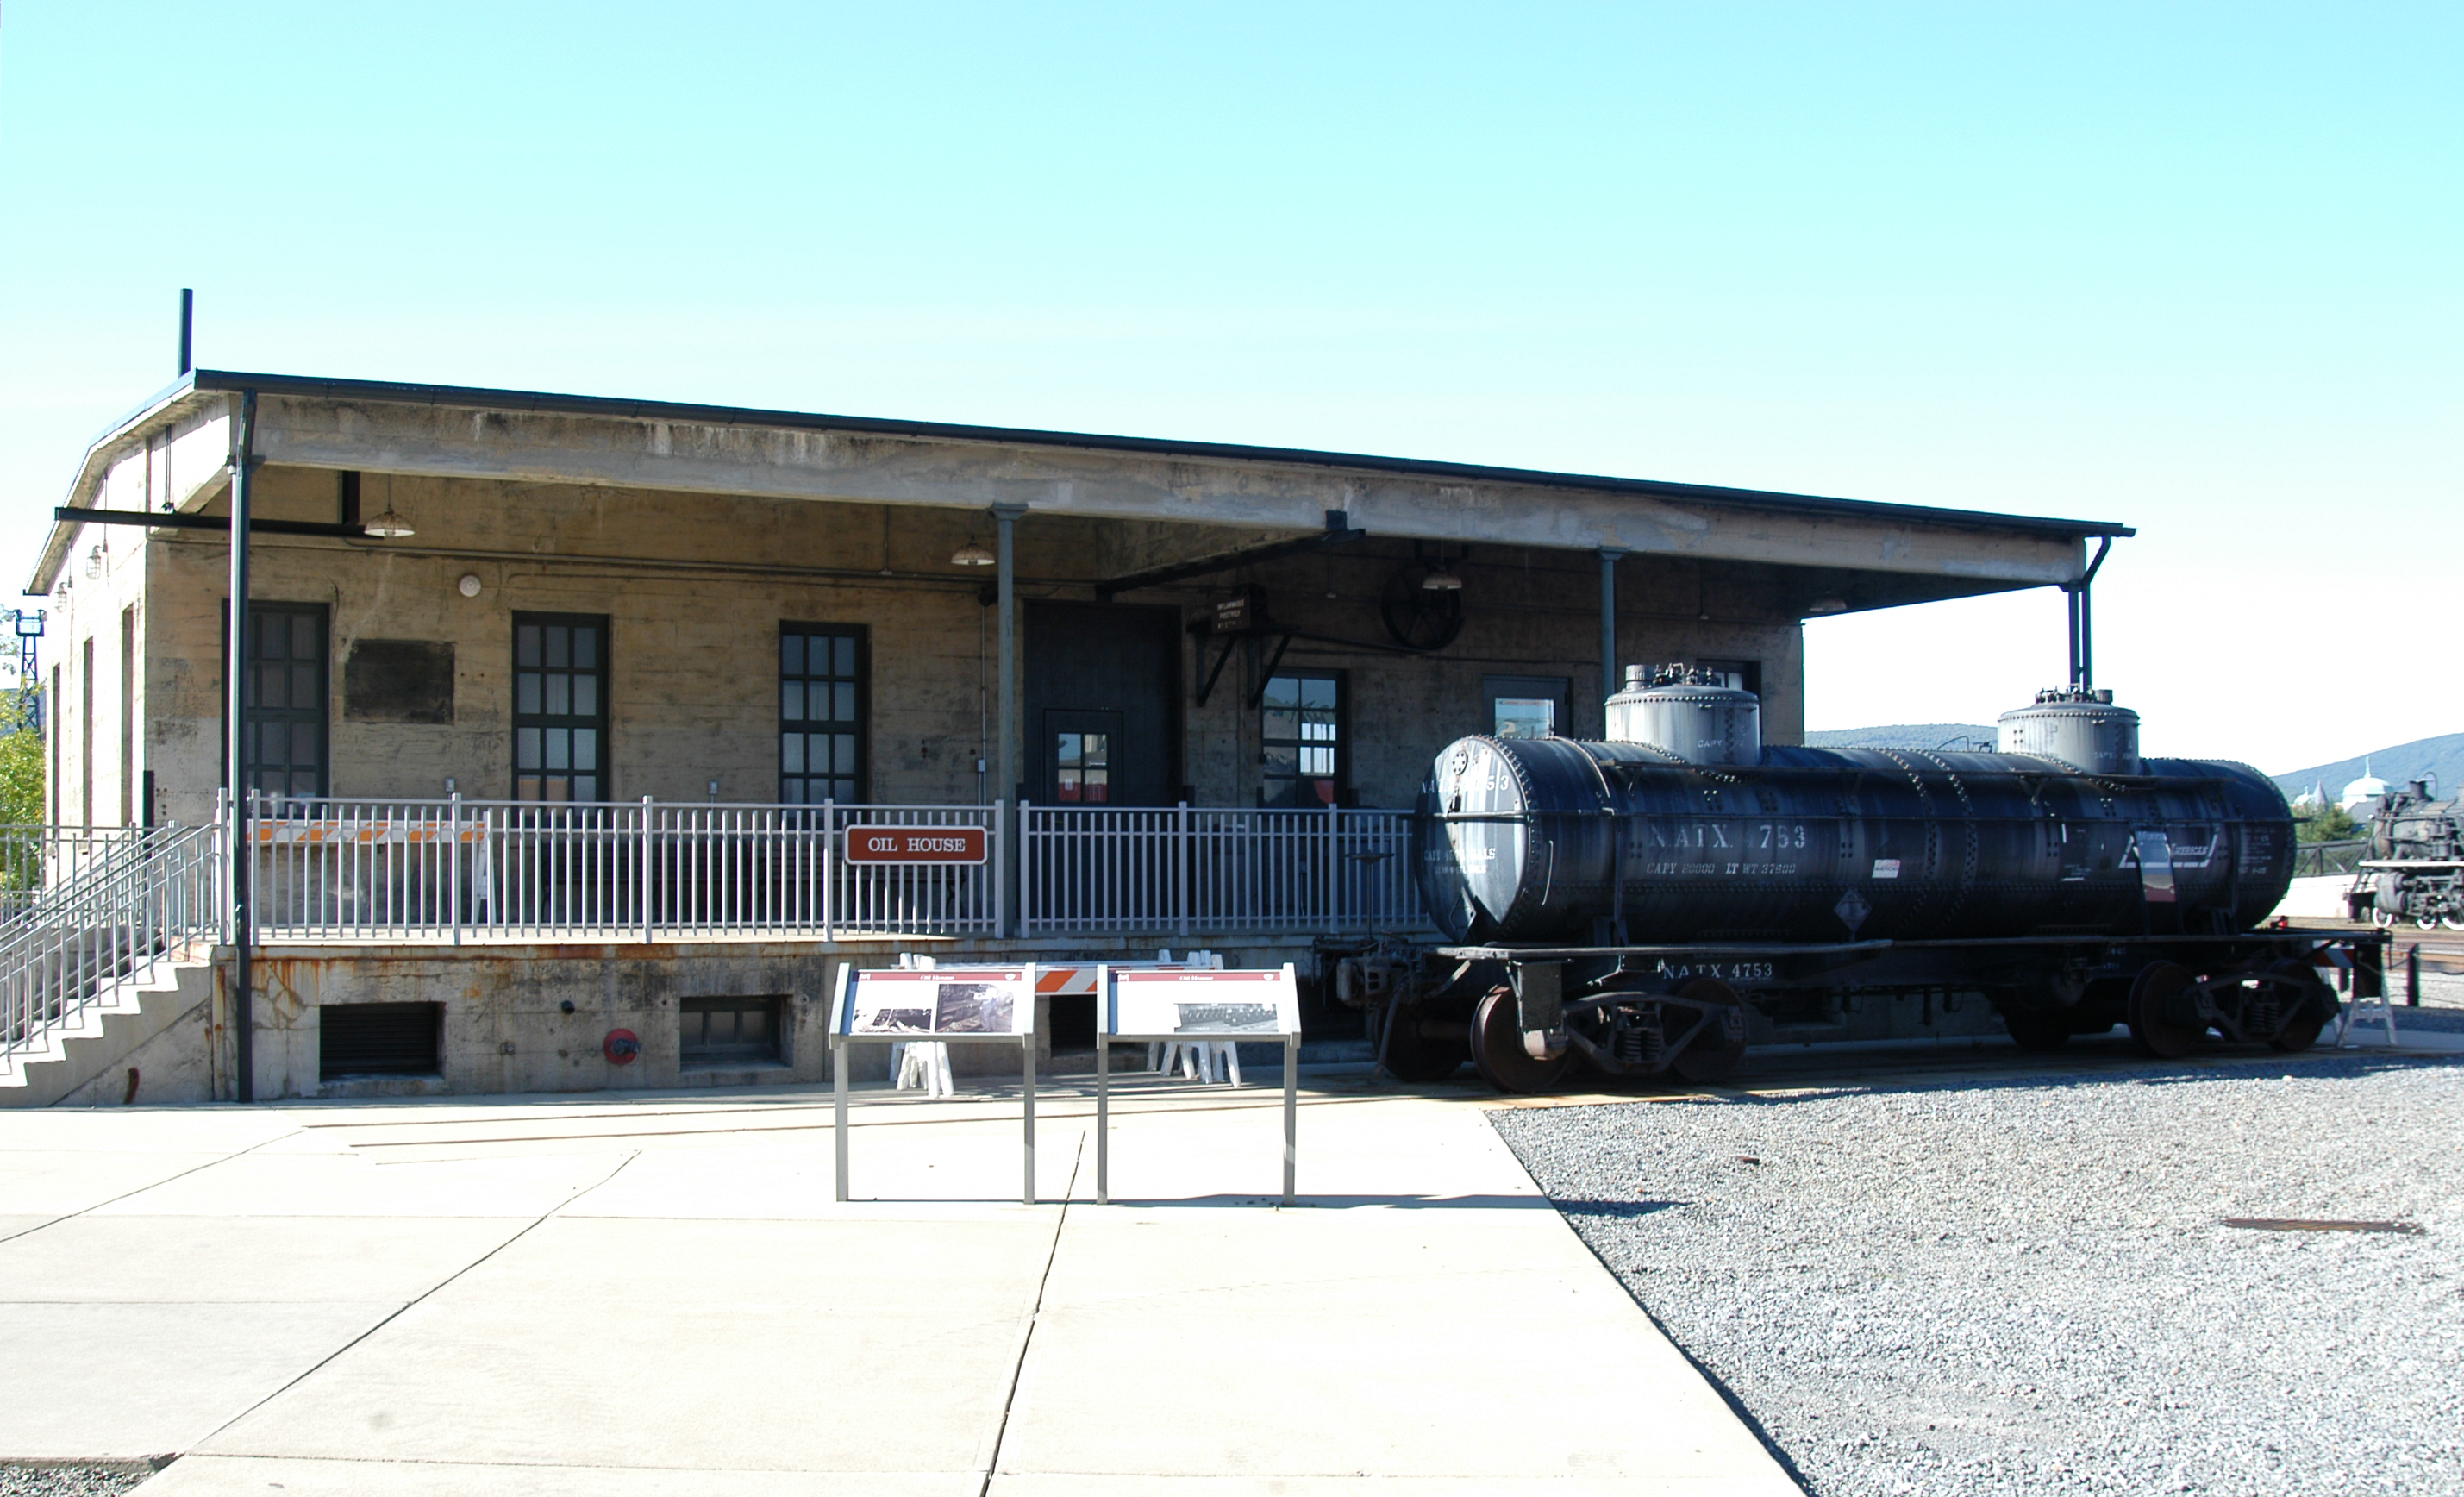 Front view of a concrete building with a very large porch and a tank railcar sitting in front of it